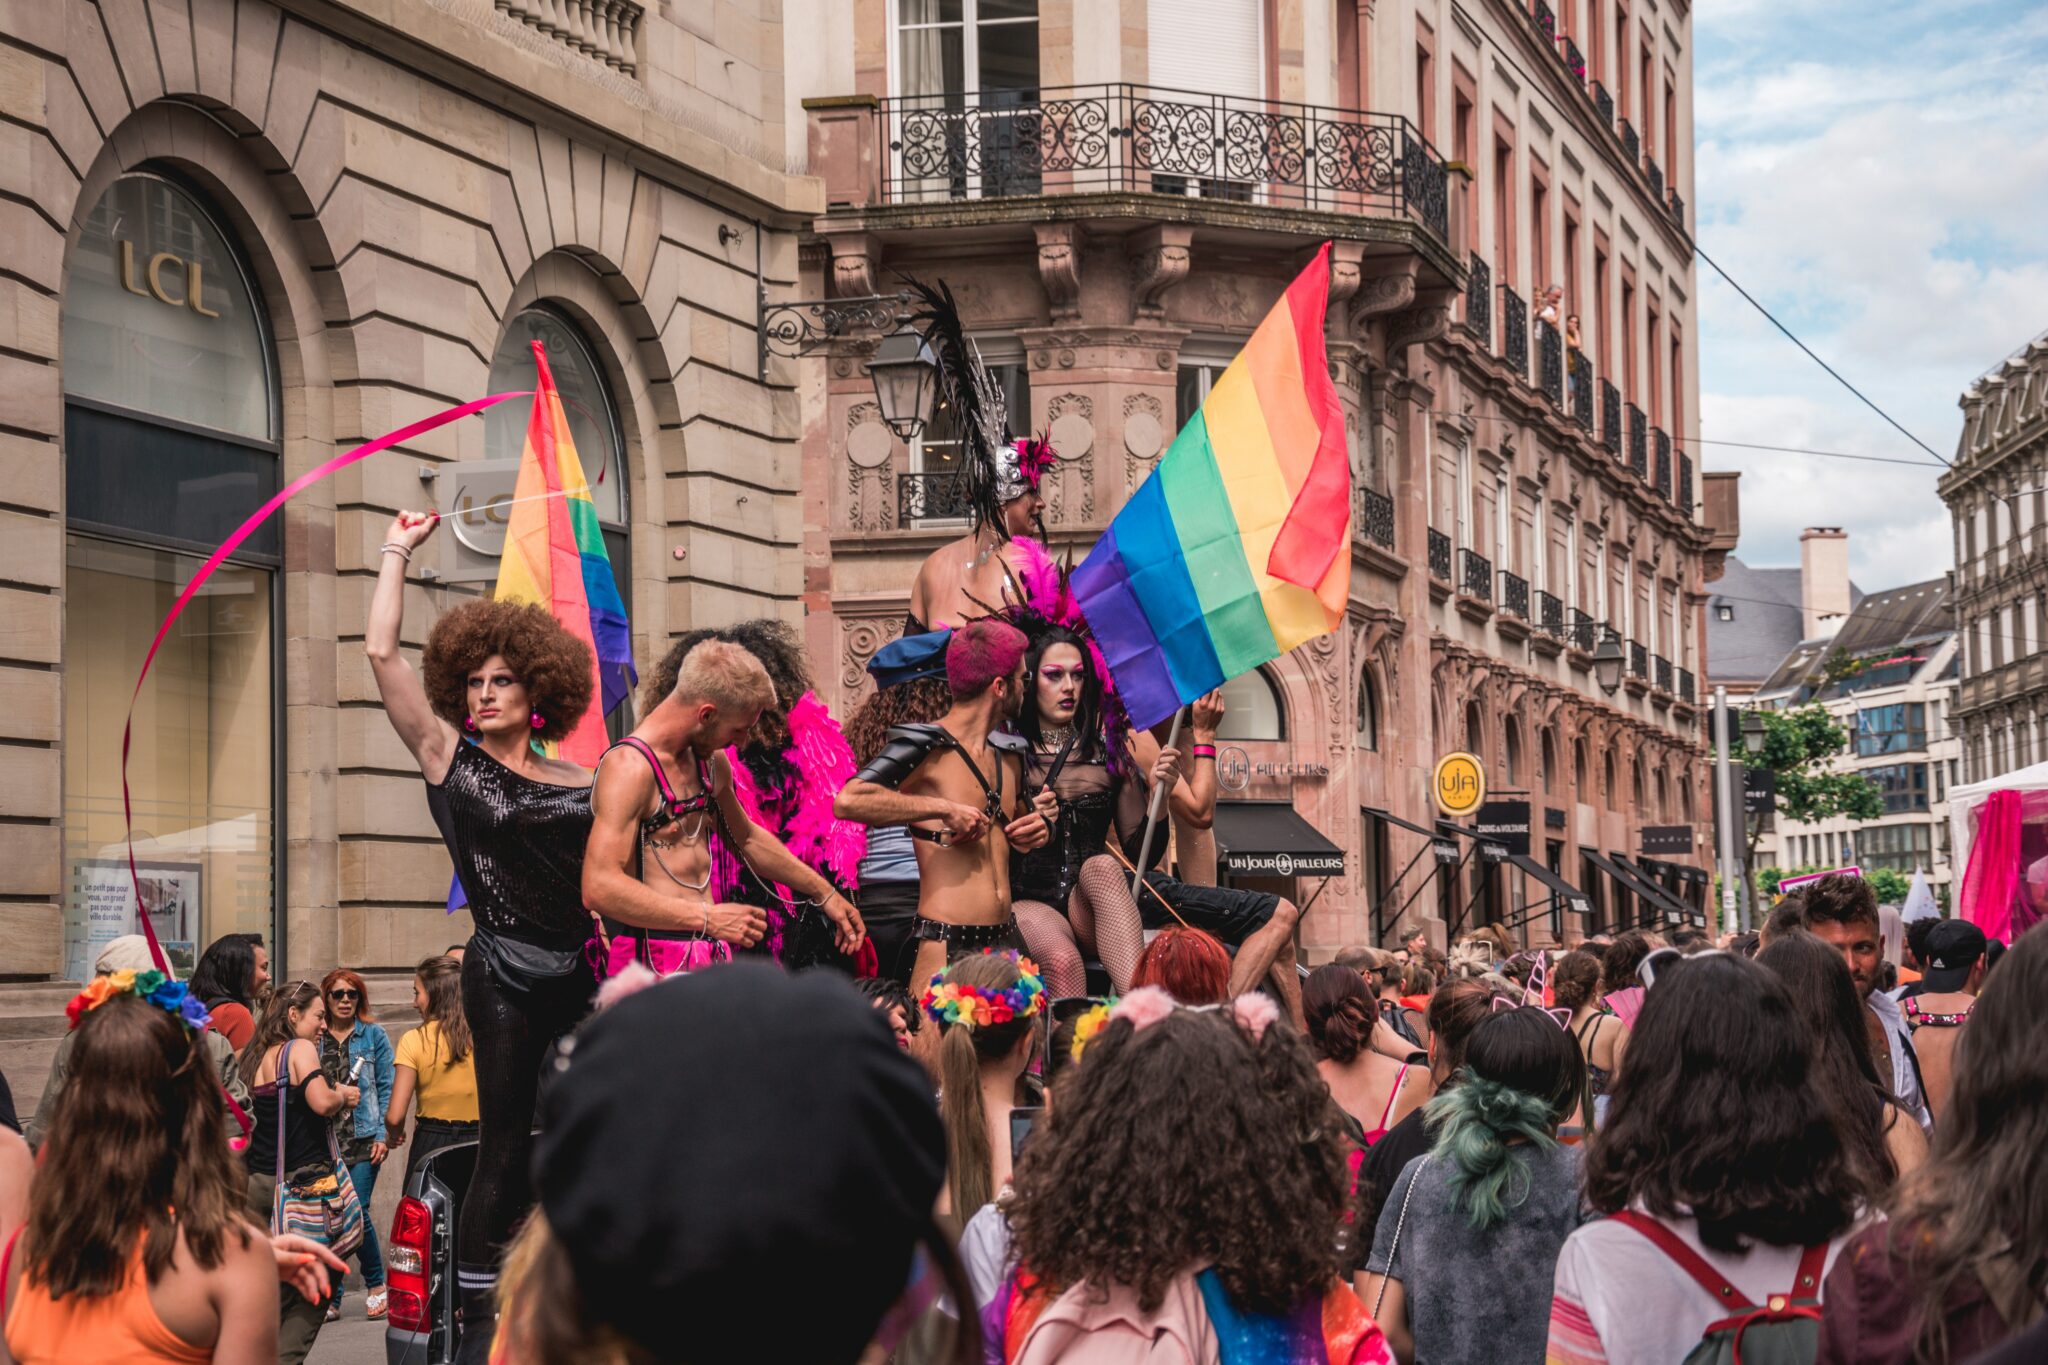 Drag queens standing on a float in a Pride parade.